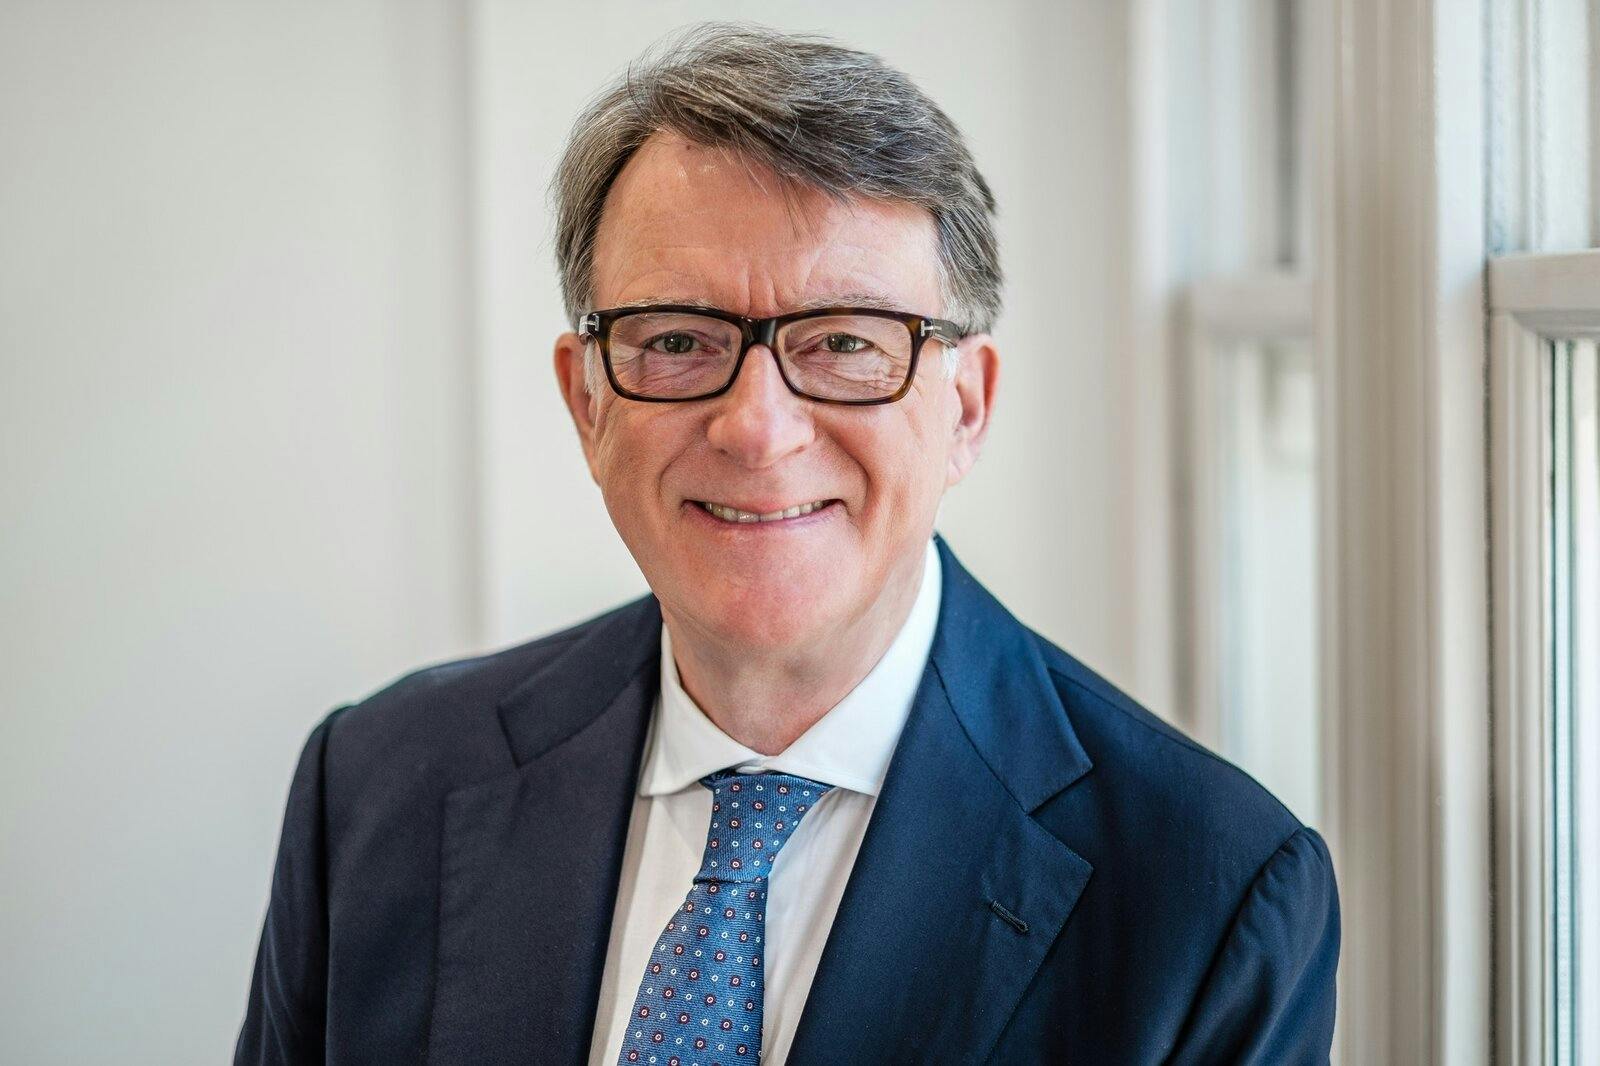 Lord Mandelson on third sector boards